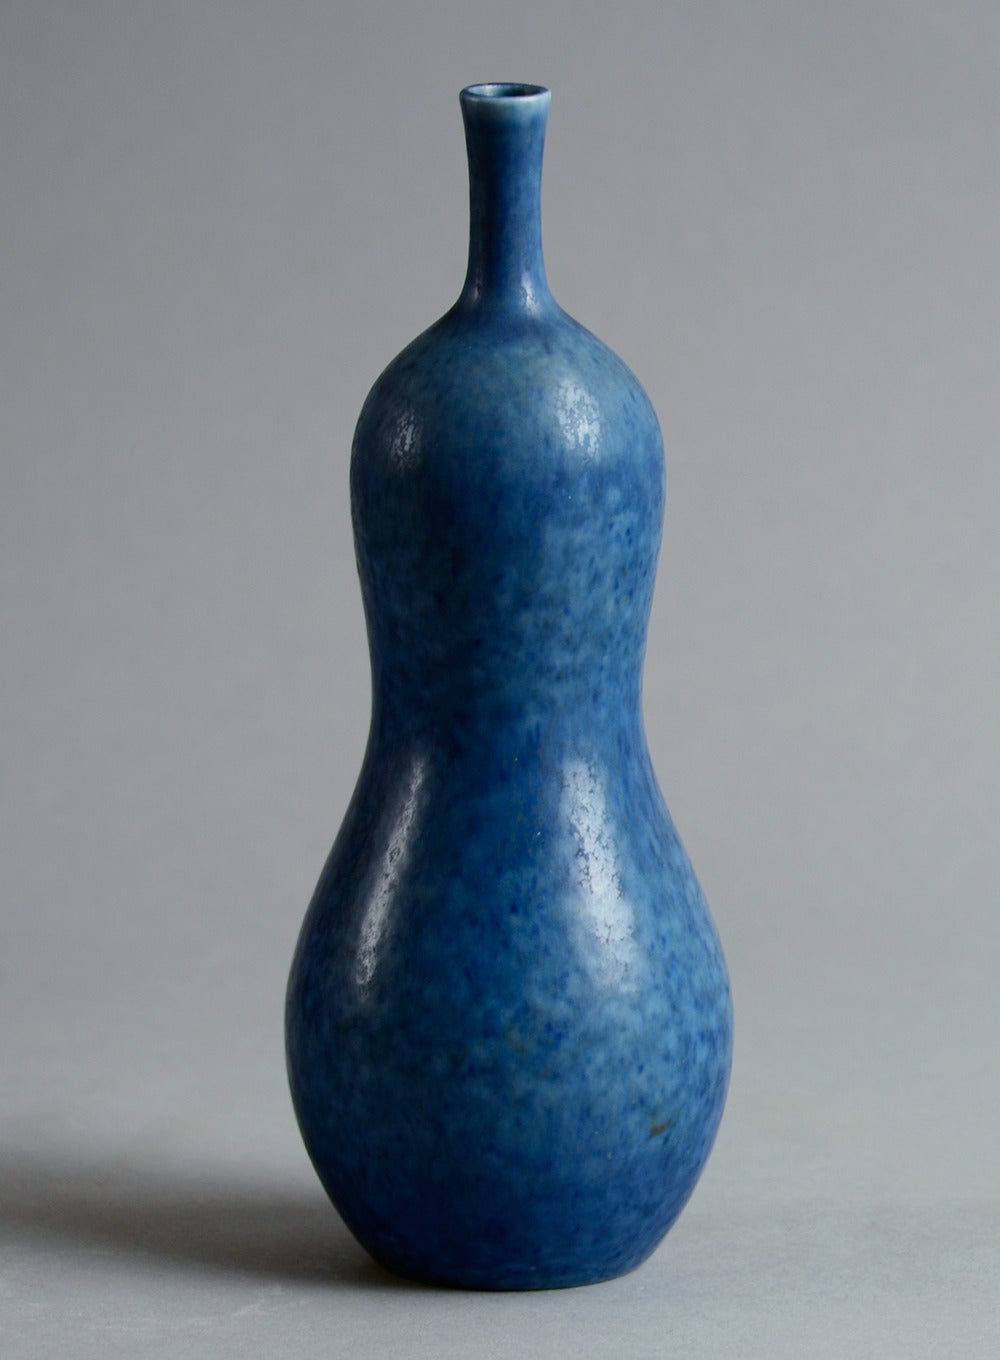 Scandinavian Modern Double Gourd Vase with Blue Glaze by Carl Harry Stalhane for Rörstrand